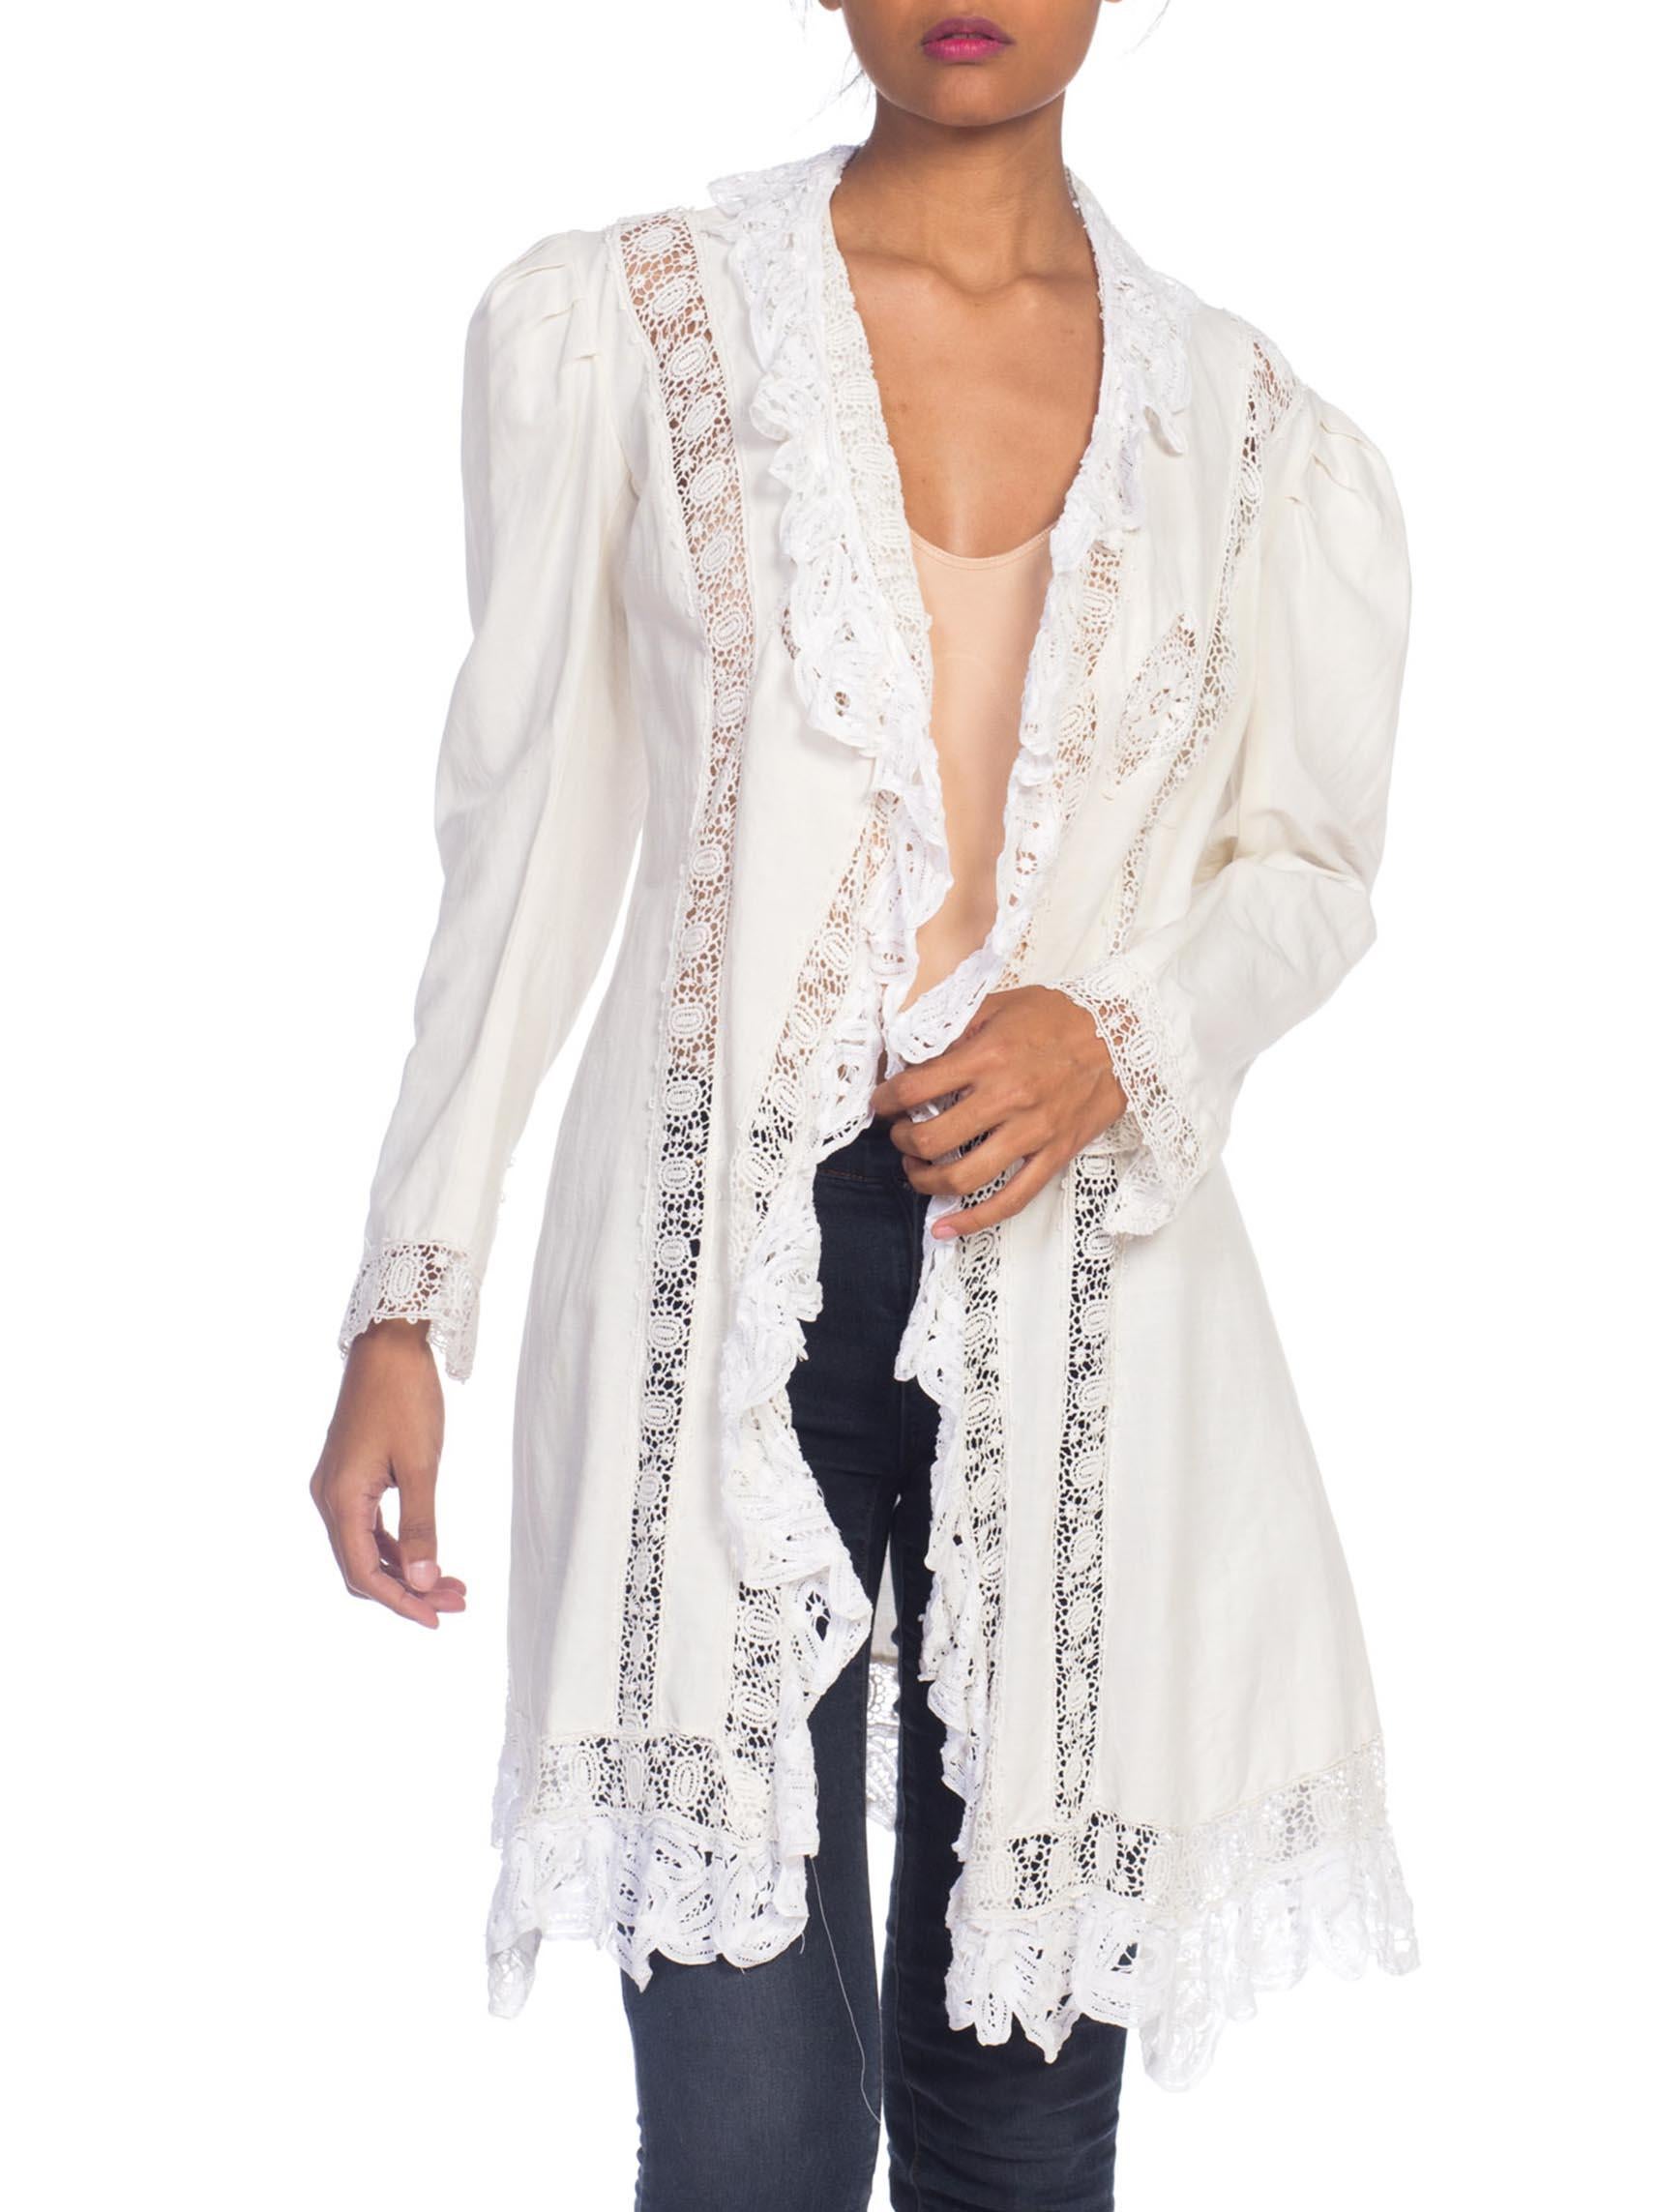 Victorian White Organic Cotton Jacket With Handmade Lace Trim In Excellent Condition For Sale In New York, NY